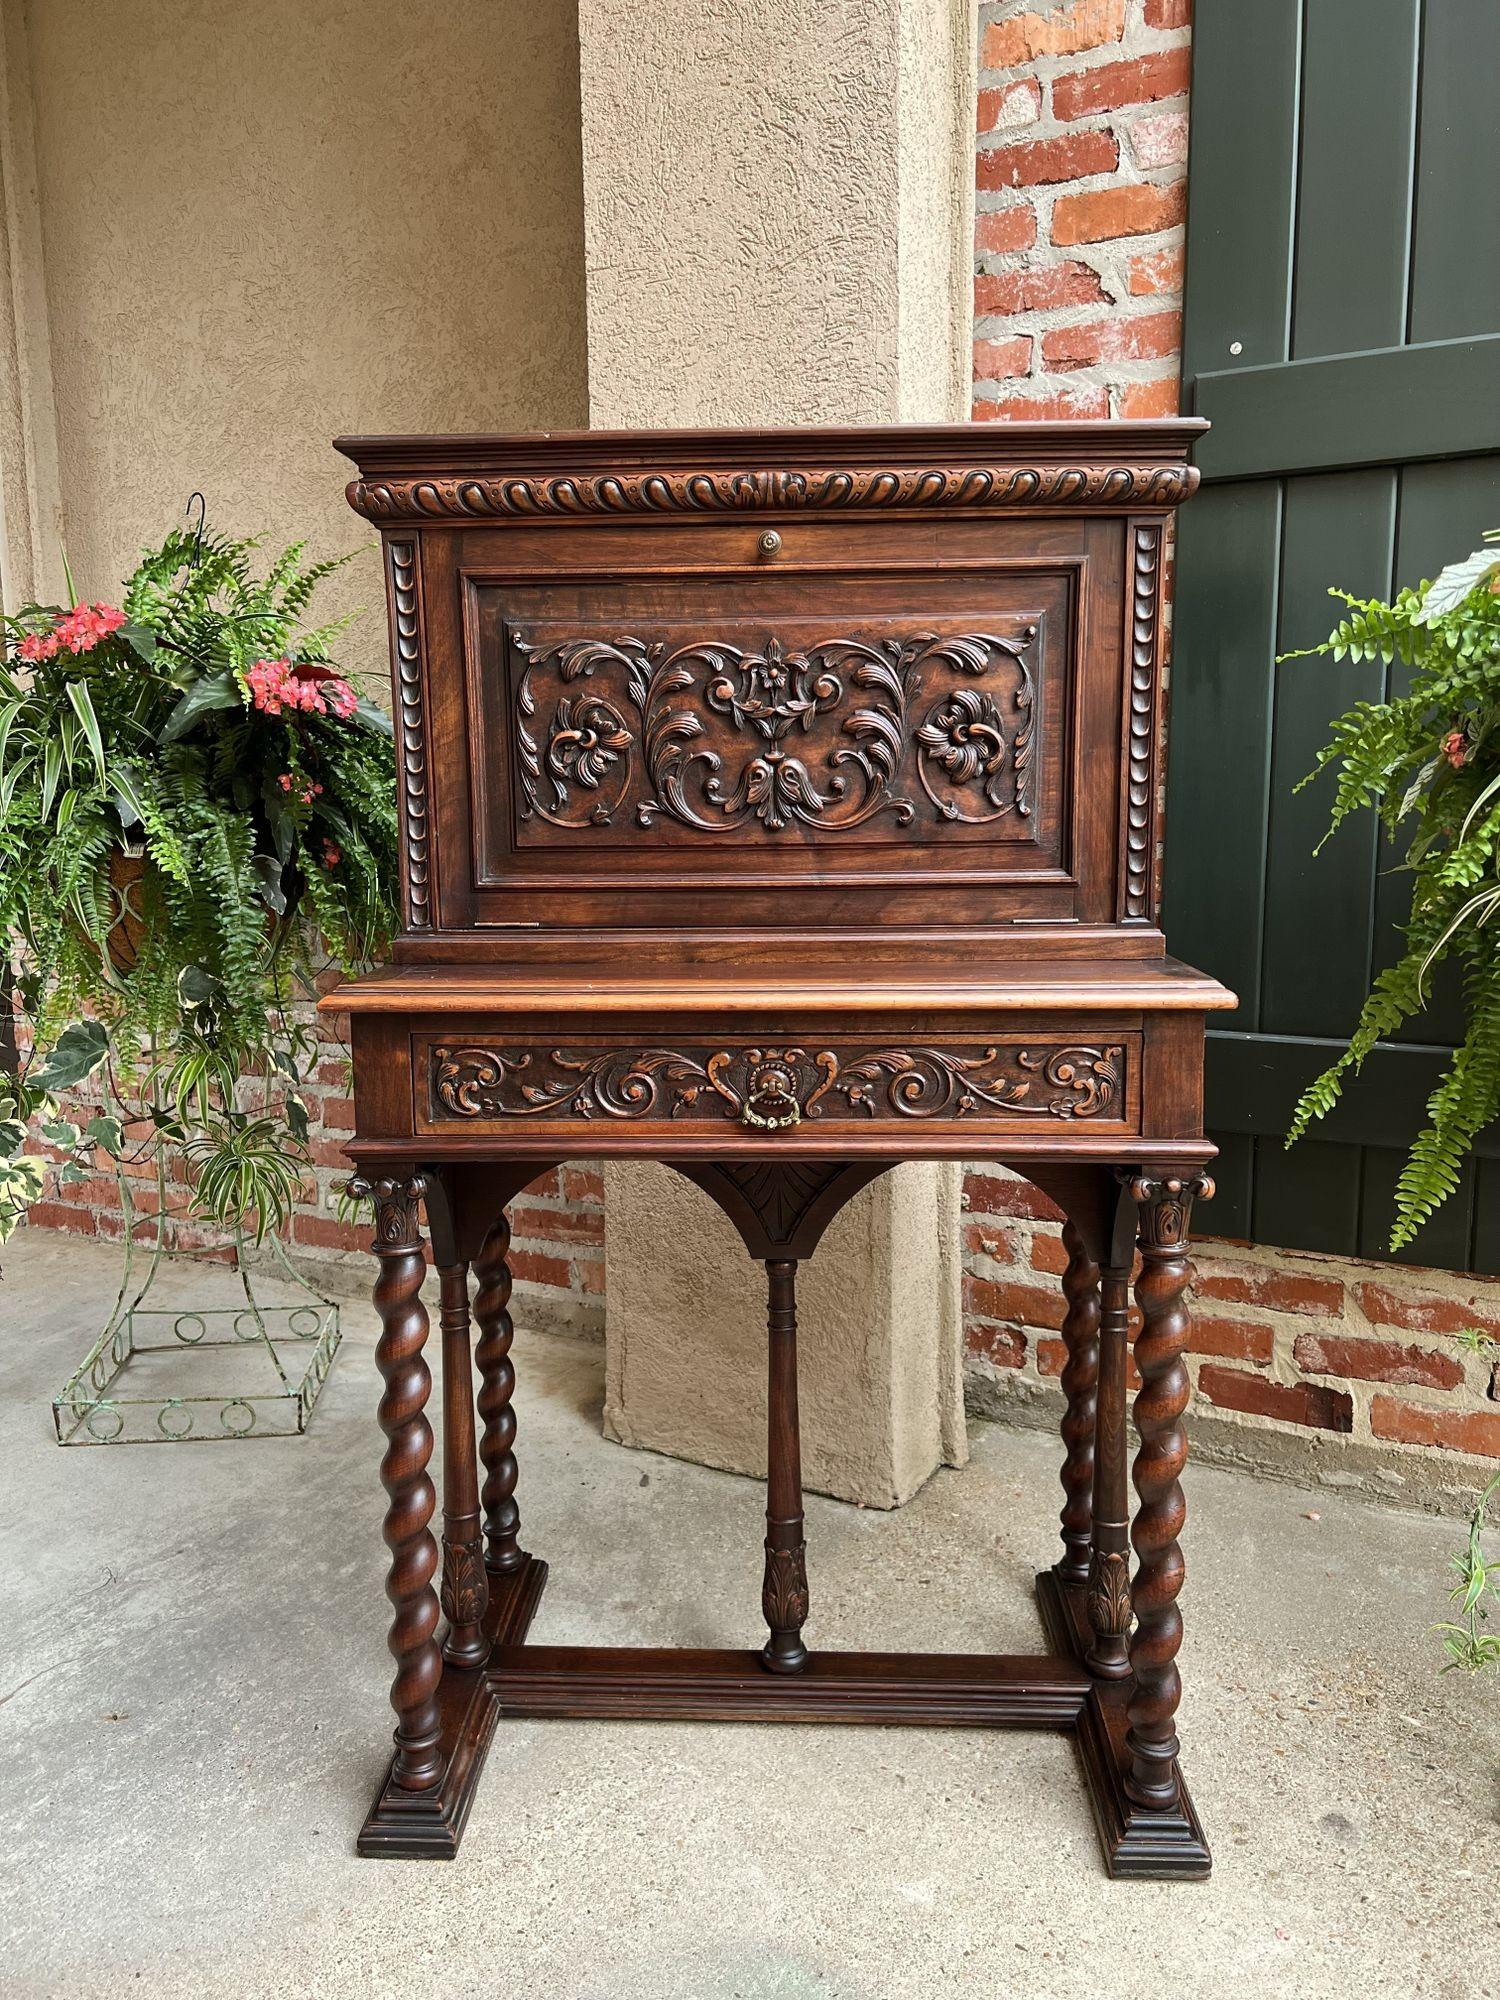 19th century French Carved Secretary Petite Writing Desk Barley Twist Louis XIII.
 
Direct from France, a beautifully appointed petite drop front walnut secretary/writing desk!
With its outstanding profile, this piece is an excellent choice for